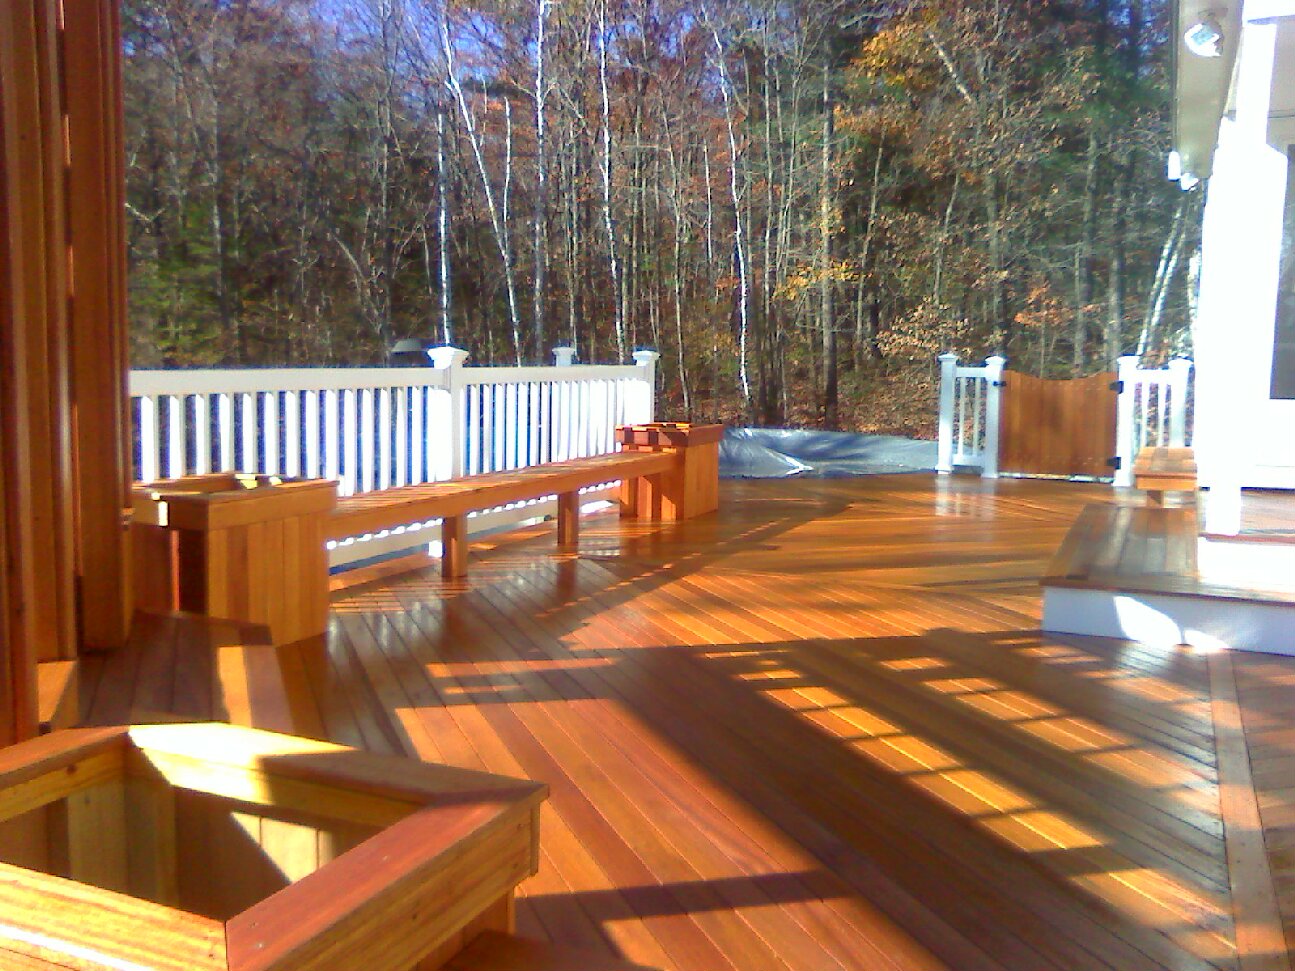 Mahogany Floor with Pergola and Hot Tub:  Vinyl Rails & Above Ground Pool;  Custom Benches, Flower Planters, & Gates (Townsend)